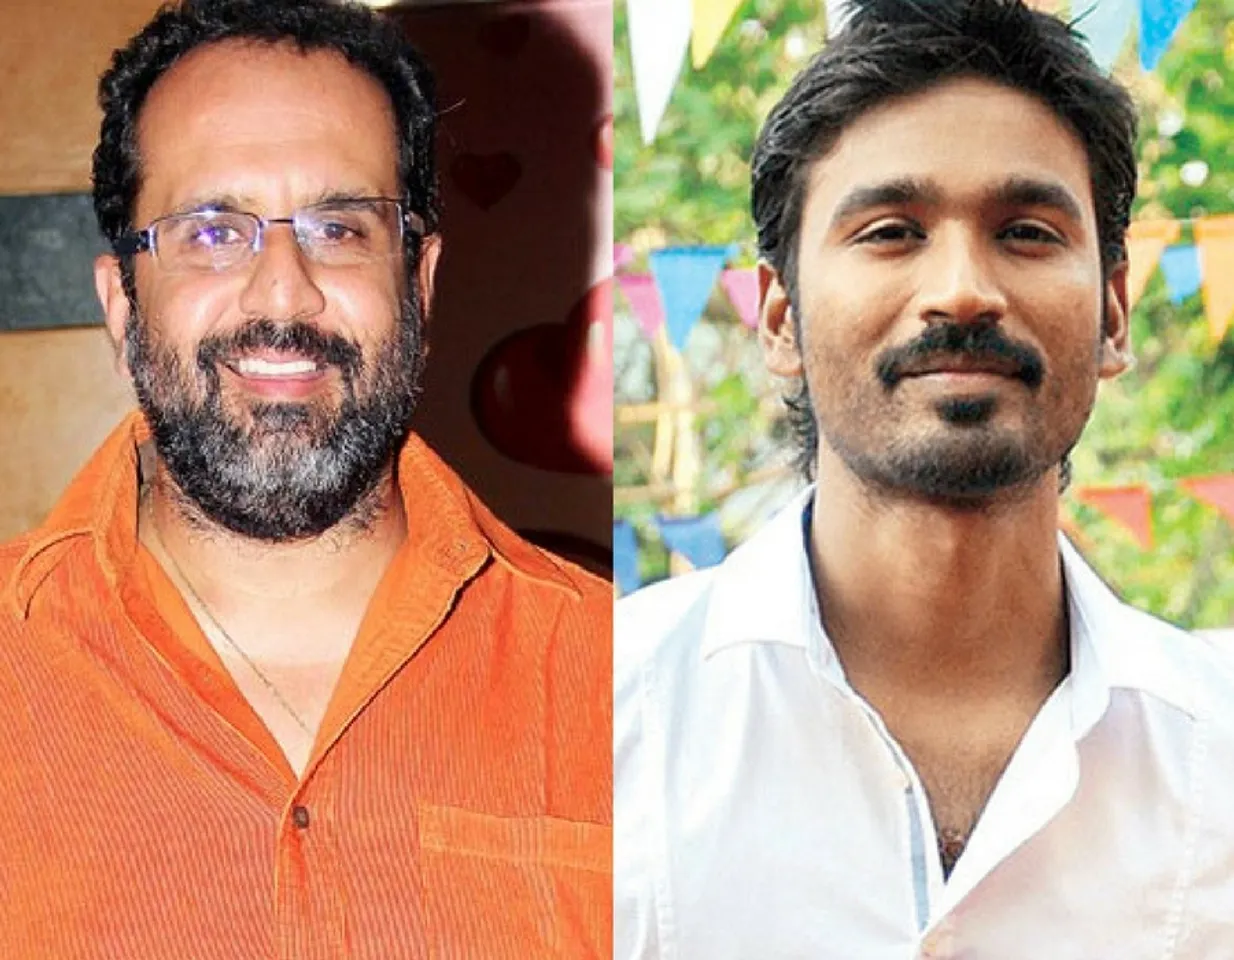 DHANUSH TO WORK WITH ANAND L RAI ONCE AGAIN